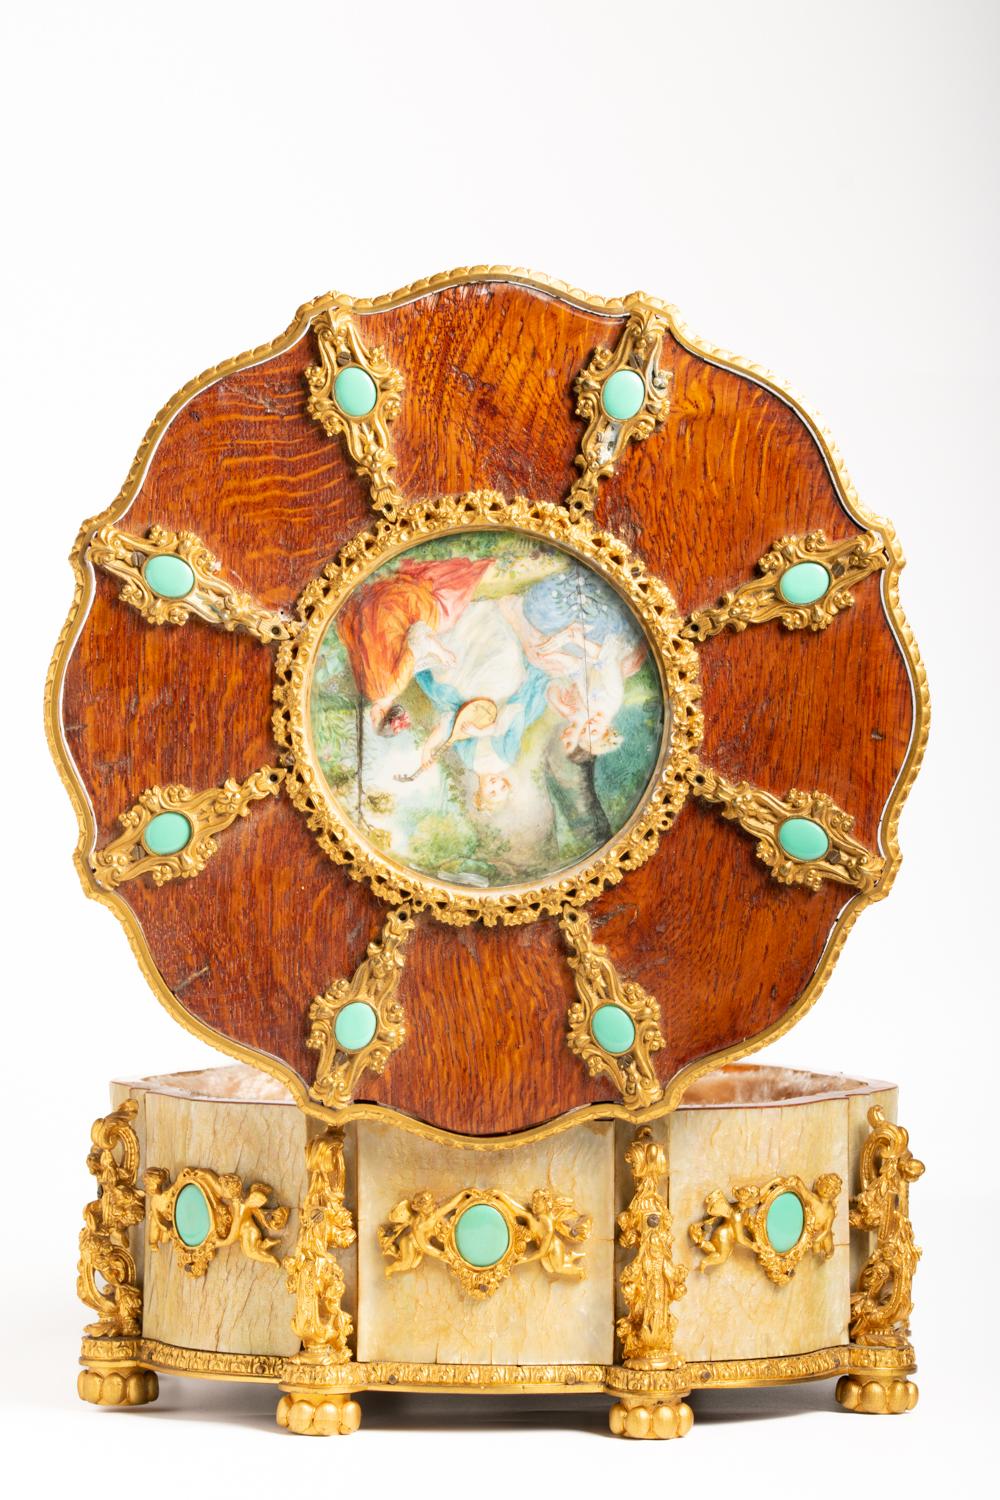 Antique Bronze Jewellery Box Maison Boissier In Good Condition For Sale In Portland, England